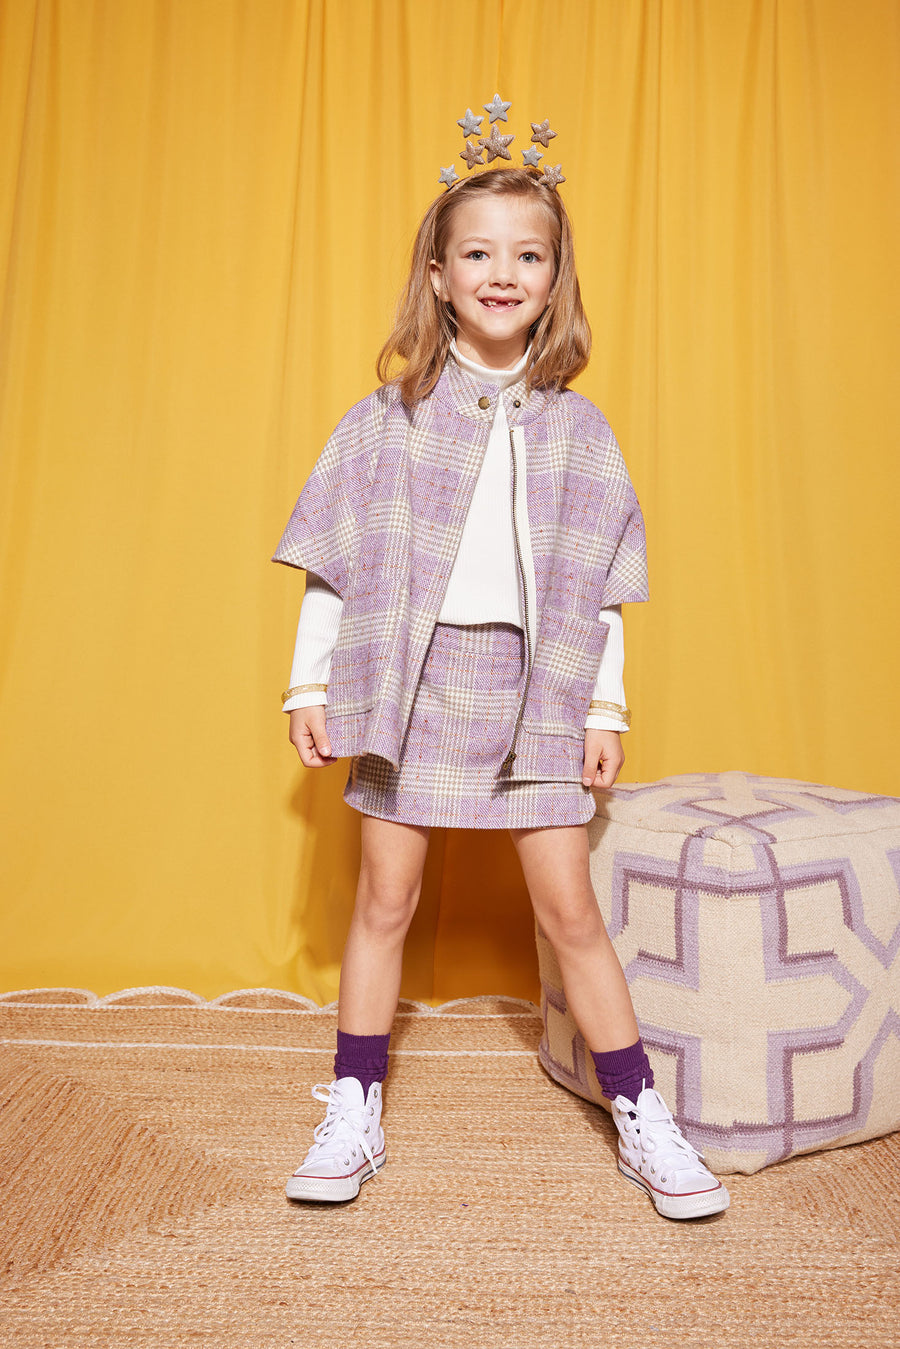 Model can be seen wearing our Mini Skirt in Lilac Tweed paired perfectly with our Cape in Lilac Tweed to complete the set. For layering, we have added our Ivory Ribbed Turtleneck underneath our Cape--BISBY girl